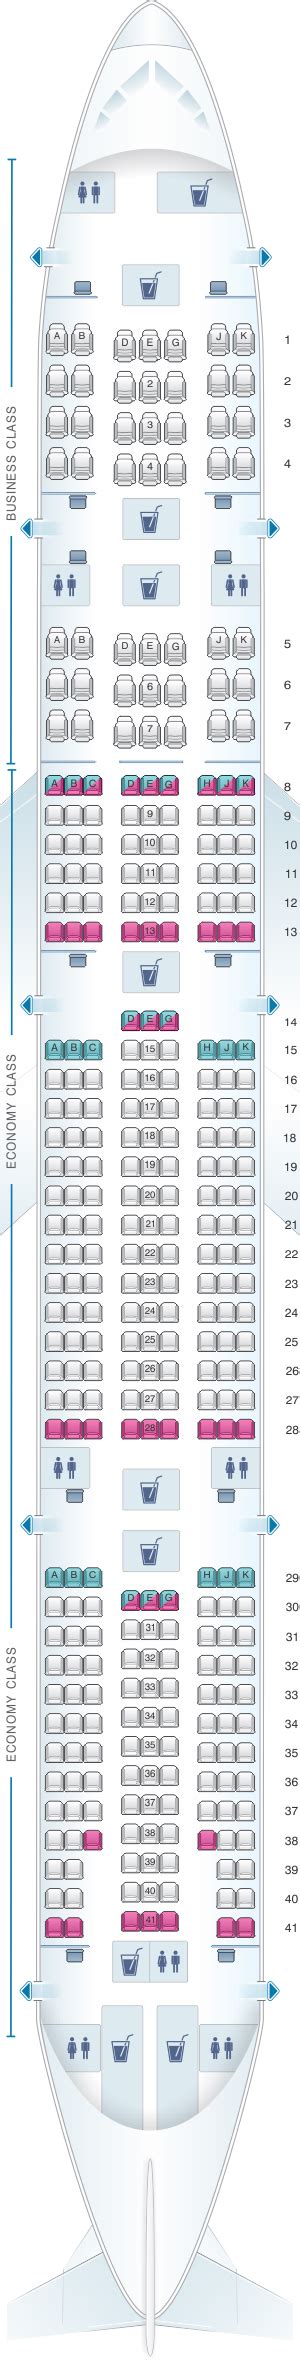 Turkish Airlines Seat Map 777 300 Elcho Table